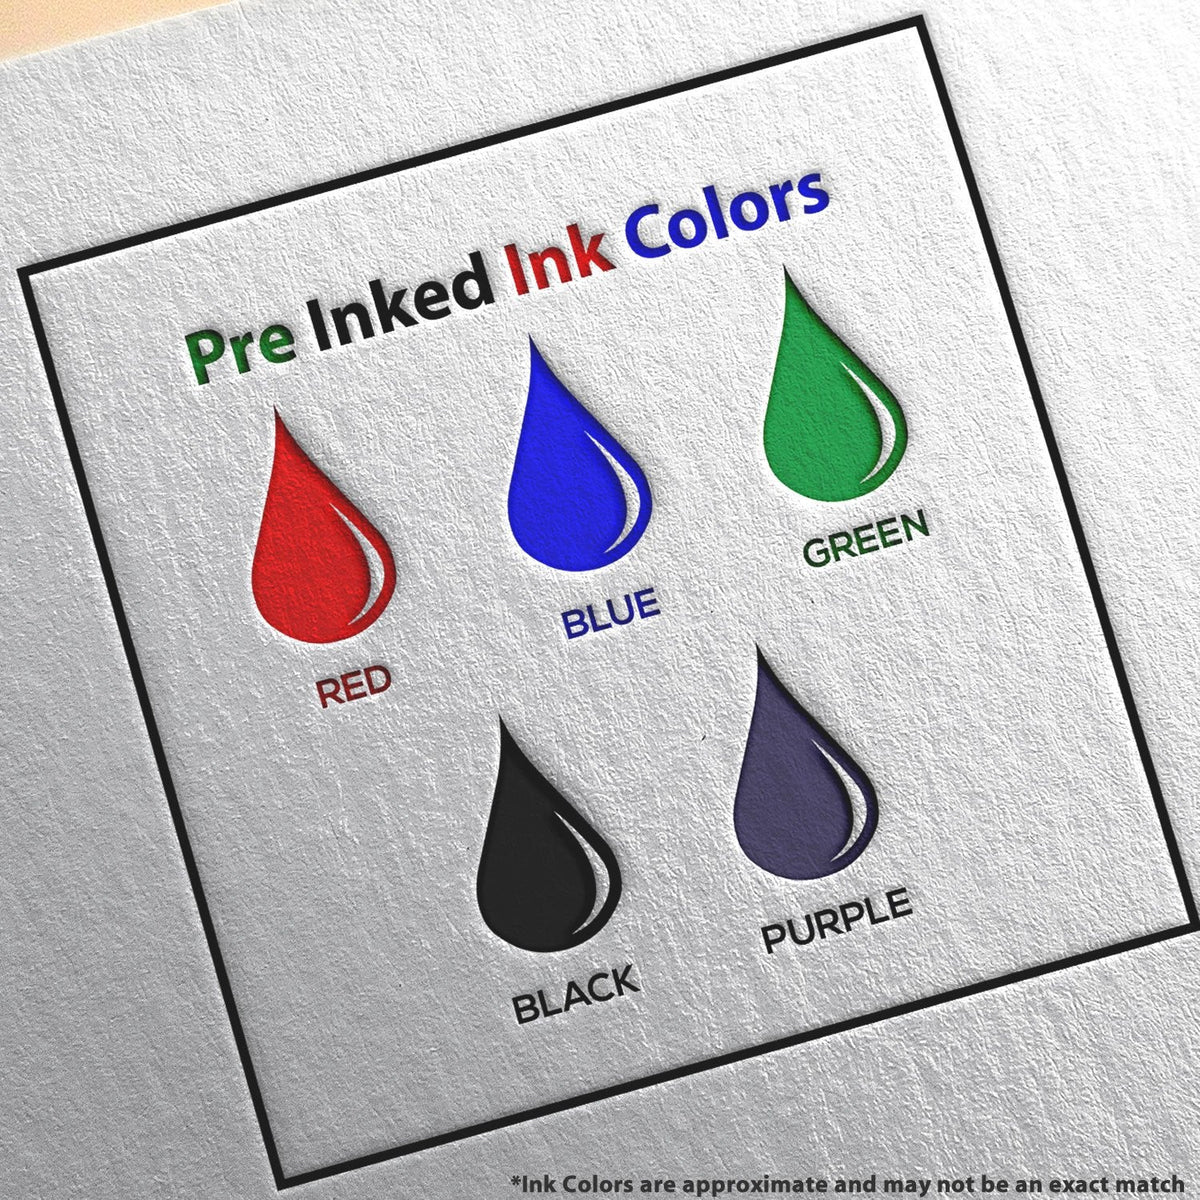 Slim Pre-Inked Entered with Date Box Stamp Ink Color Options